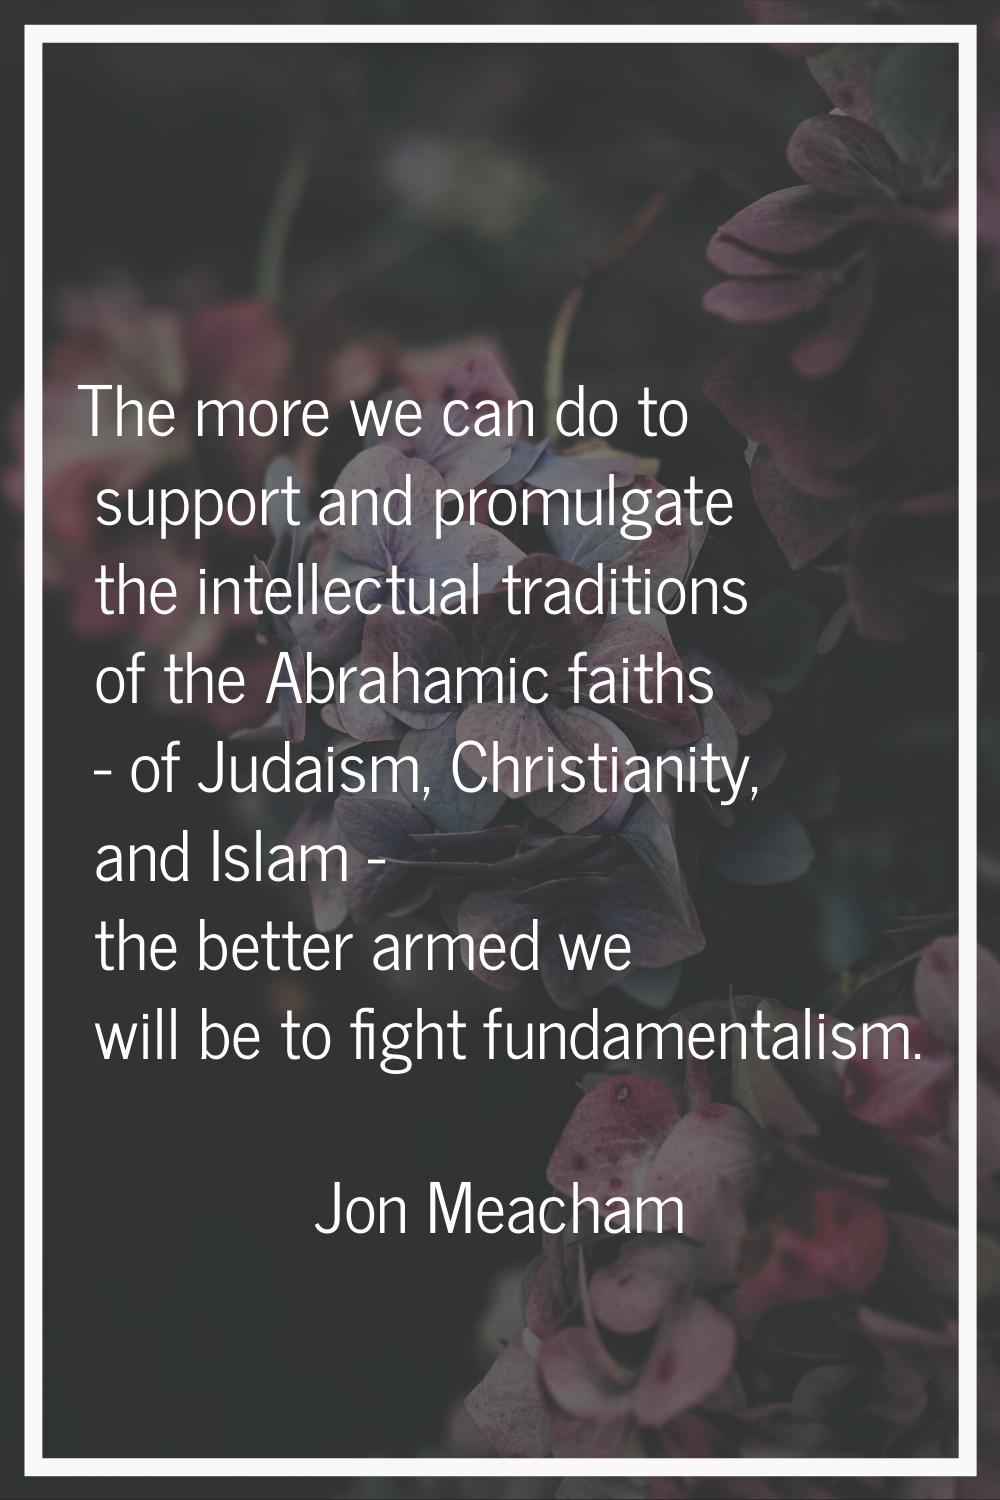 The more we can do to support and promulgate the intellectual traditions of the Abrahamic faiths - 